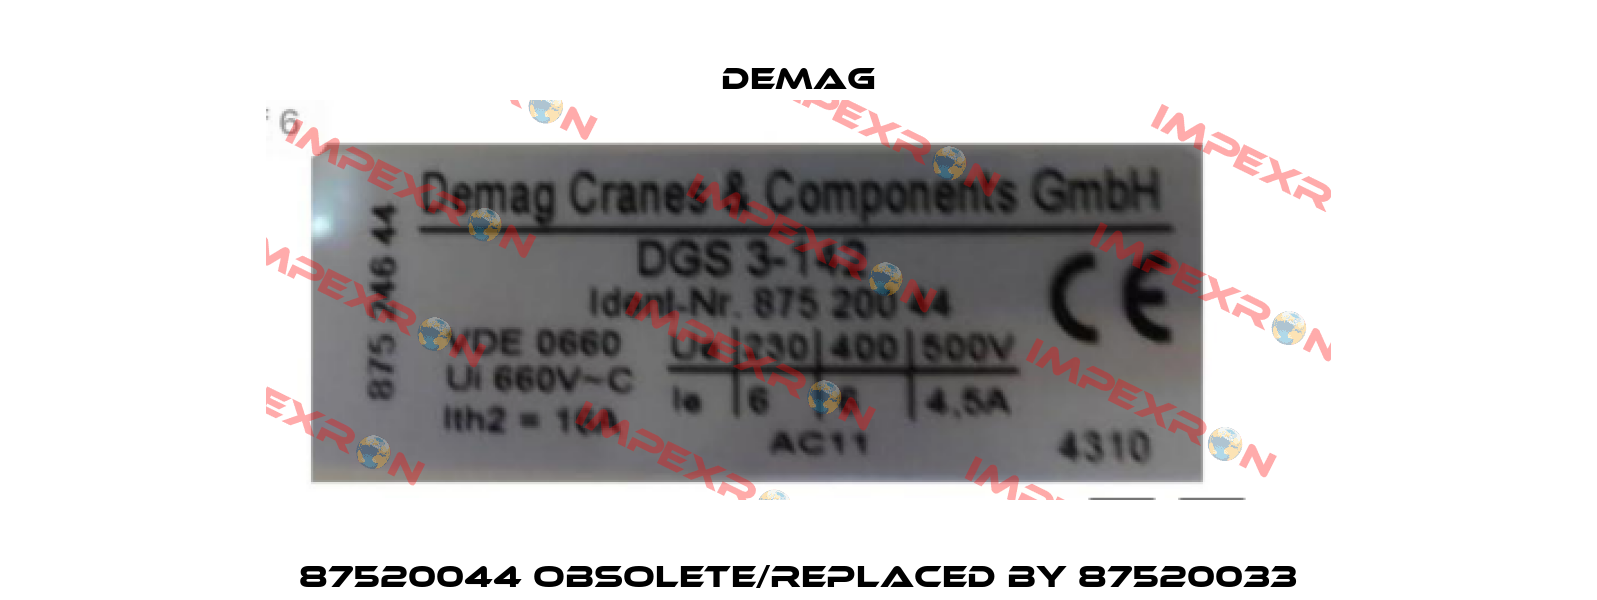 87520044 obsolete/replaced by 87520033 Demag